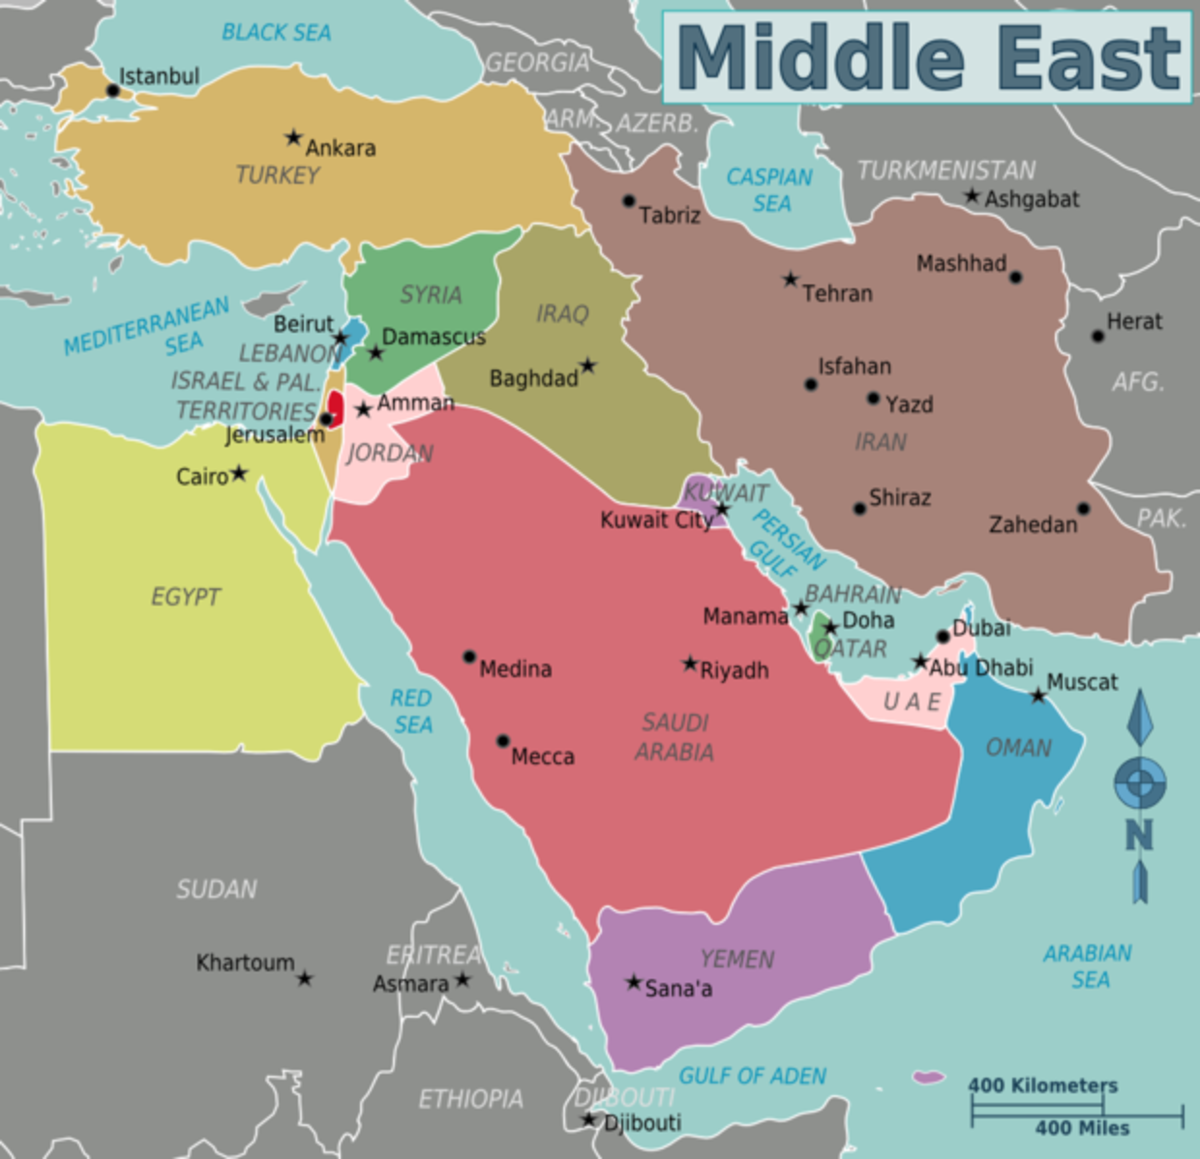 The map of Middle East